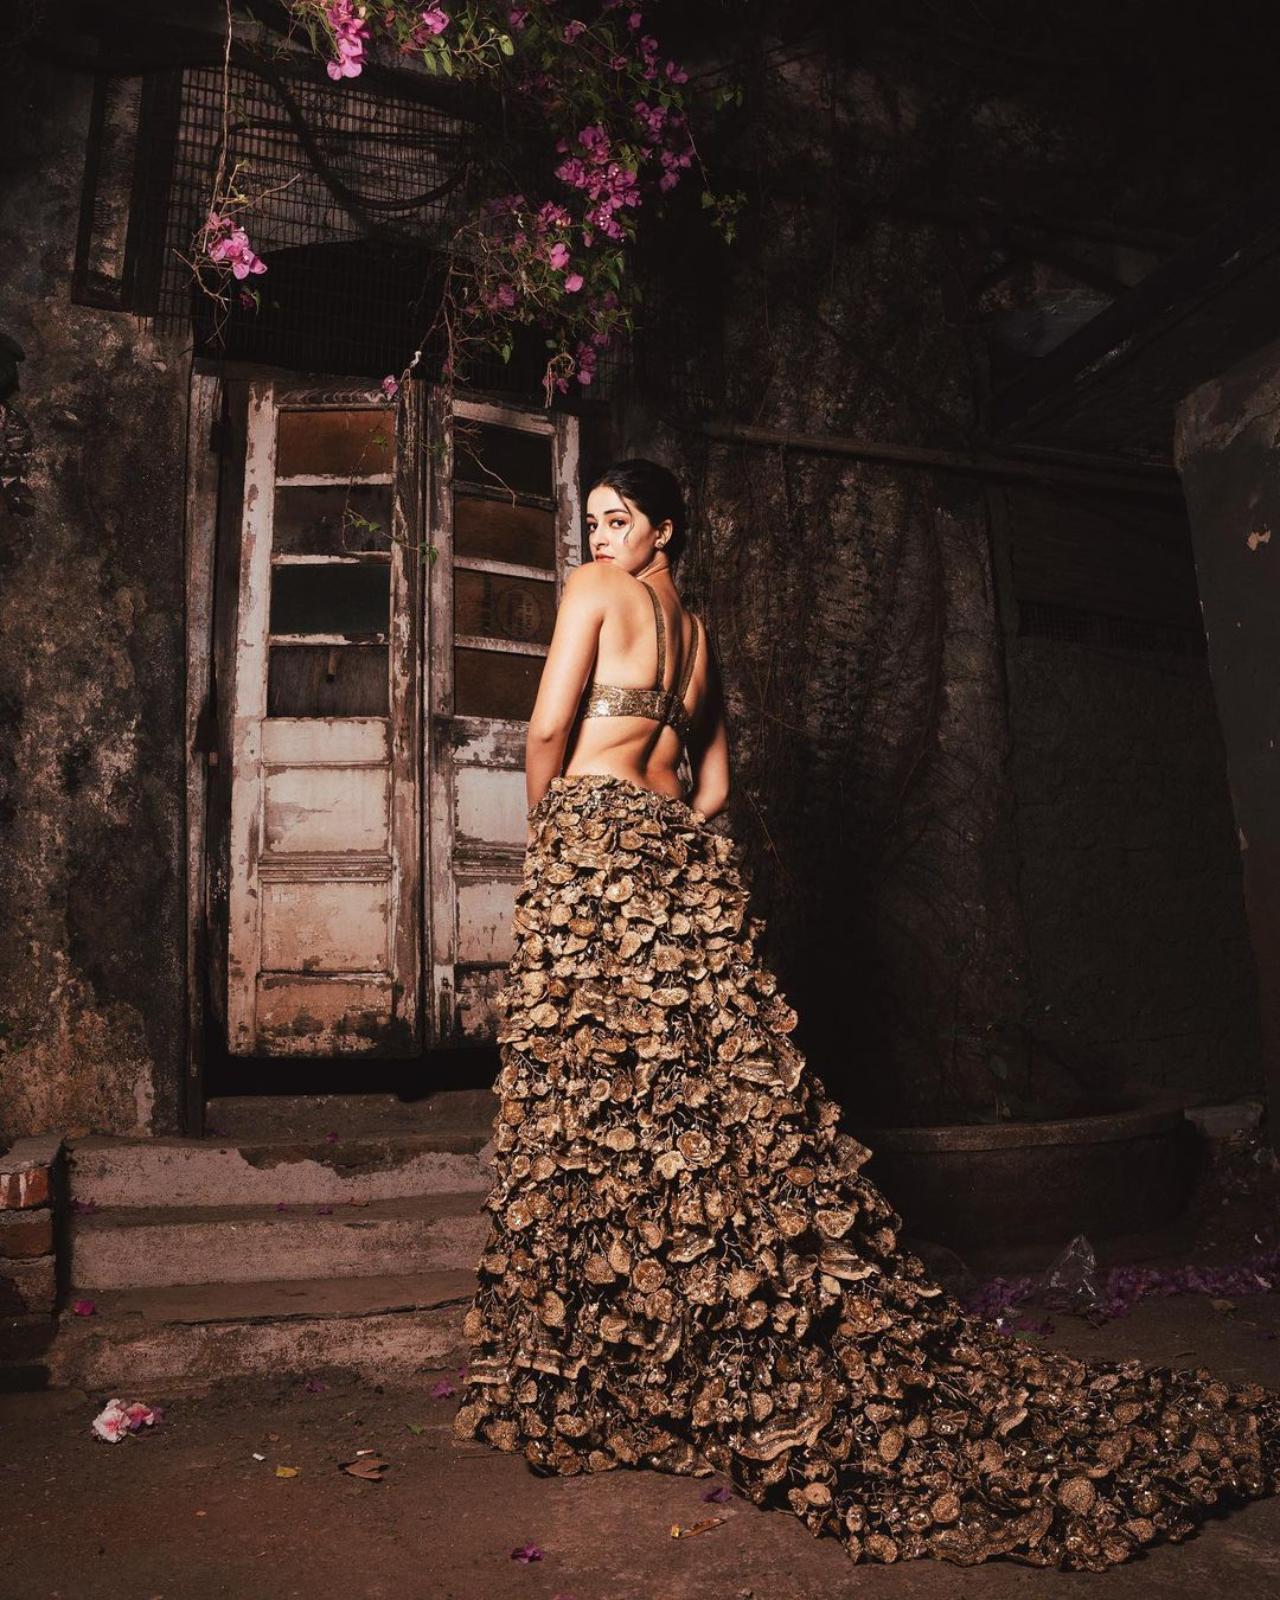 Ananya Panday opted for a creation by Rahul Mishra who also designed Zendaya's outfit. She is wearing The Tree of Life, black and gold 'Botanical' gown from Mishra's Couture Spring 2022 collection showcased at the Haute Couture Week in Paris.